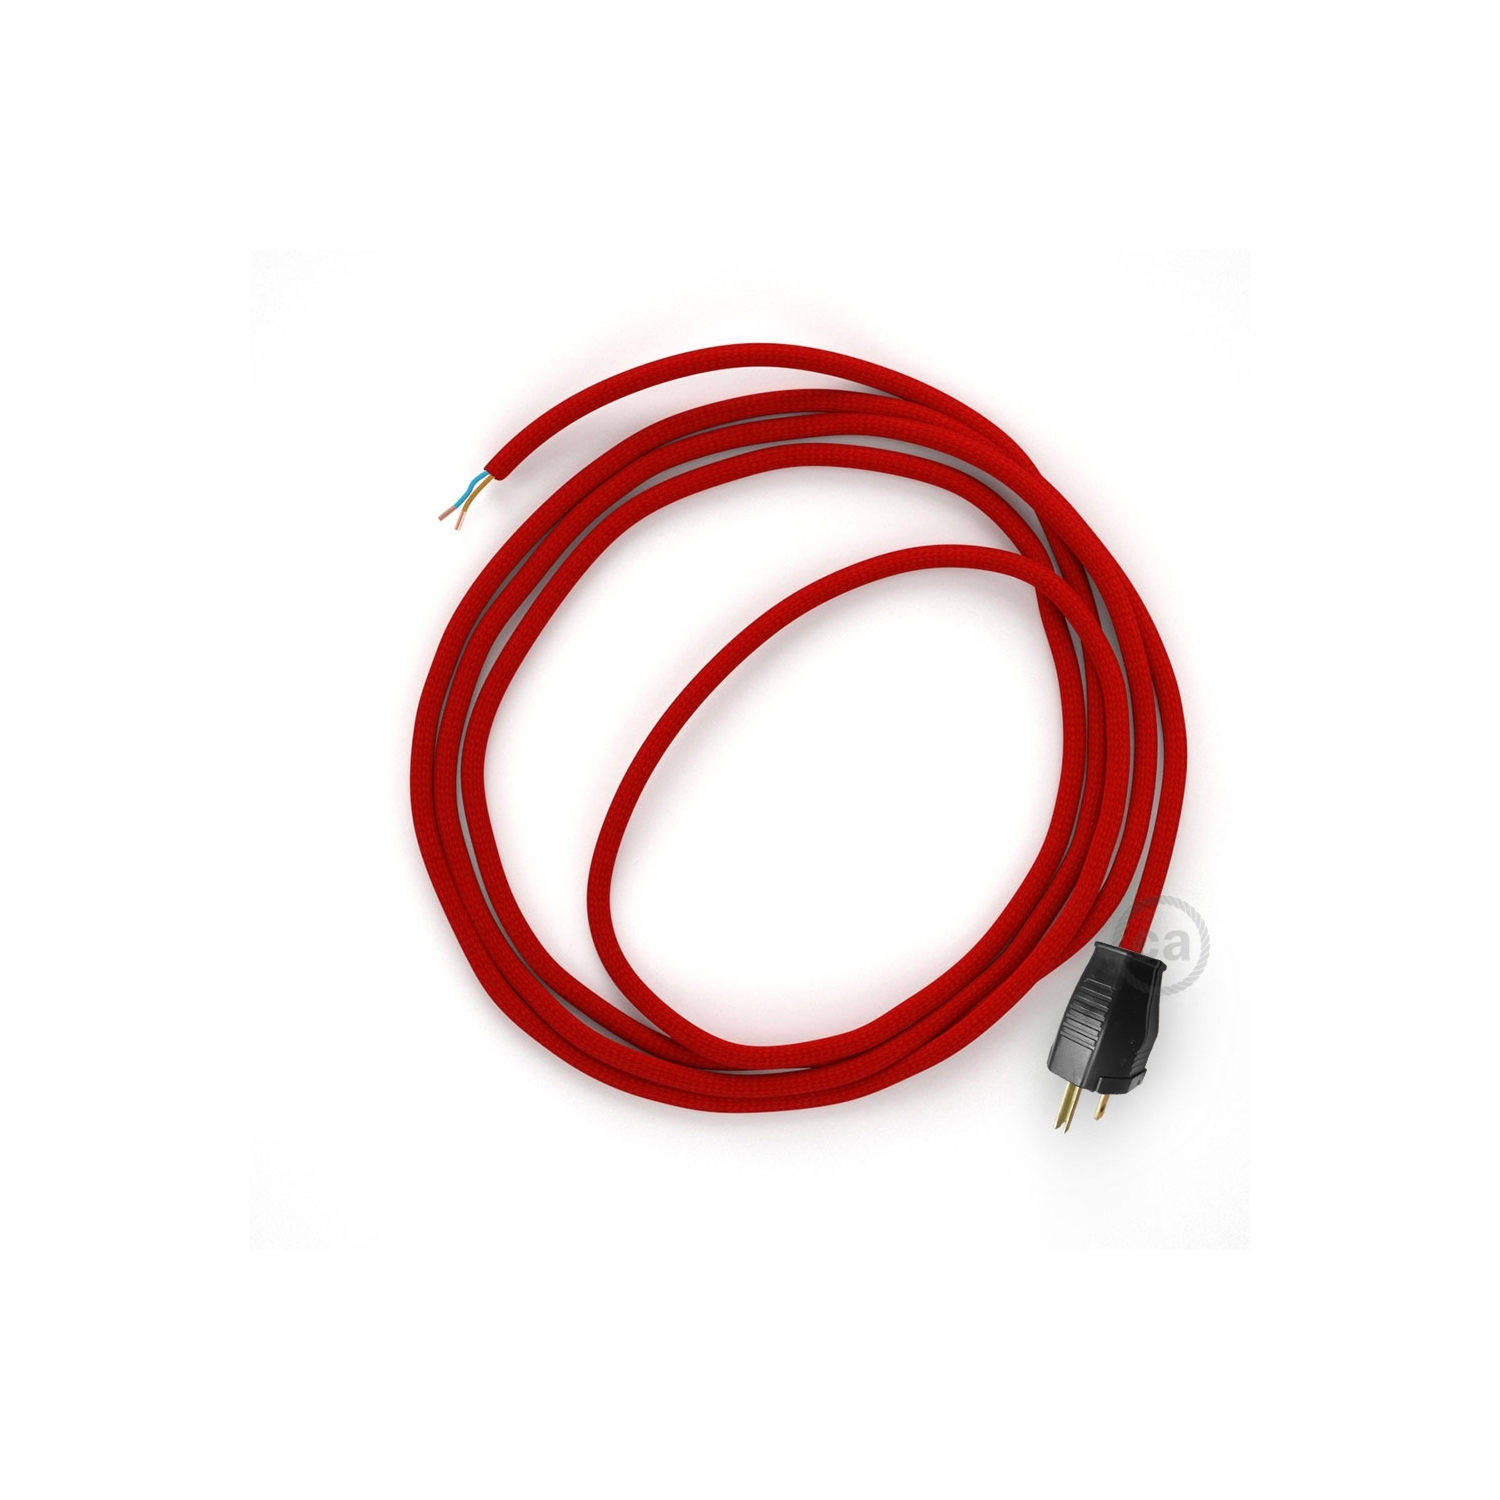 Cord-set - RM09 Red Rayon Covered Round Cable